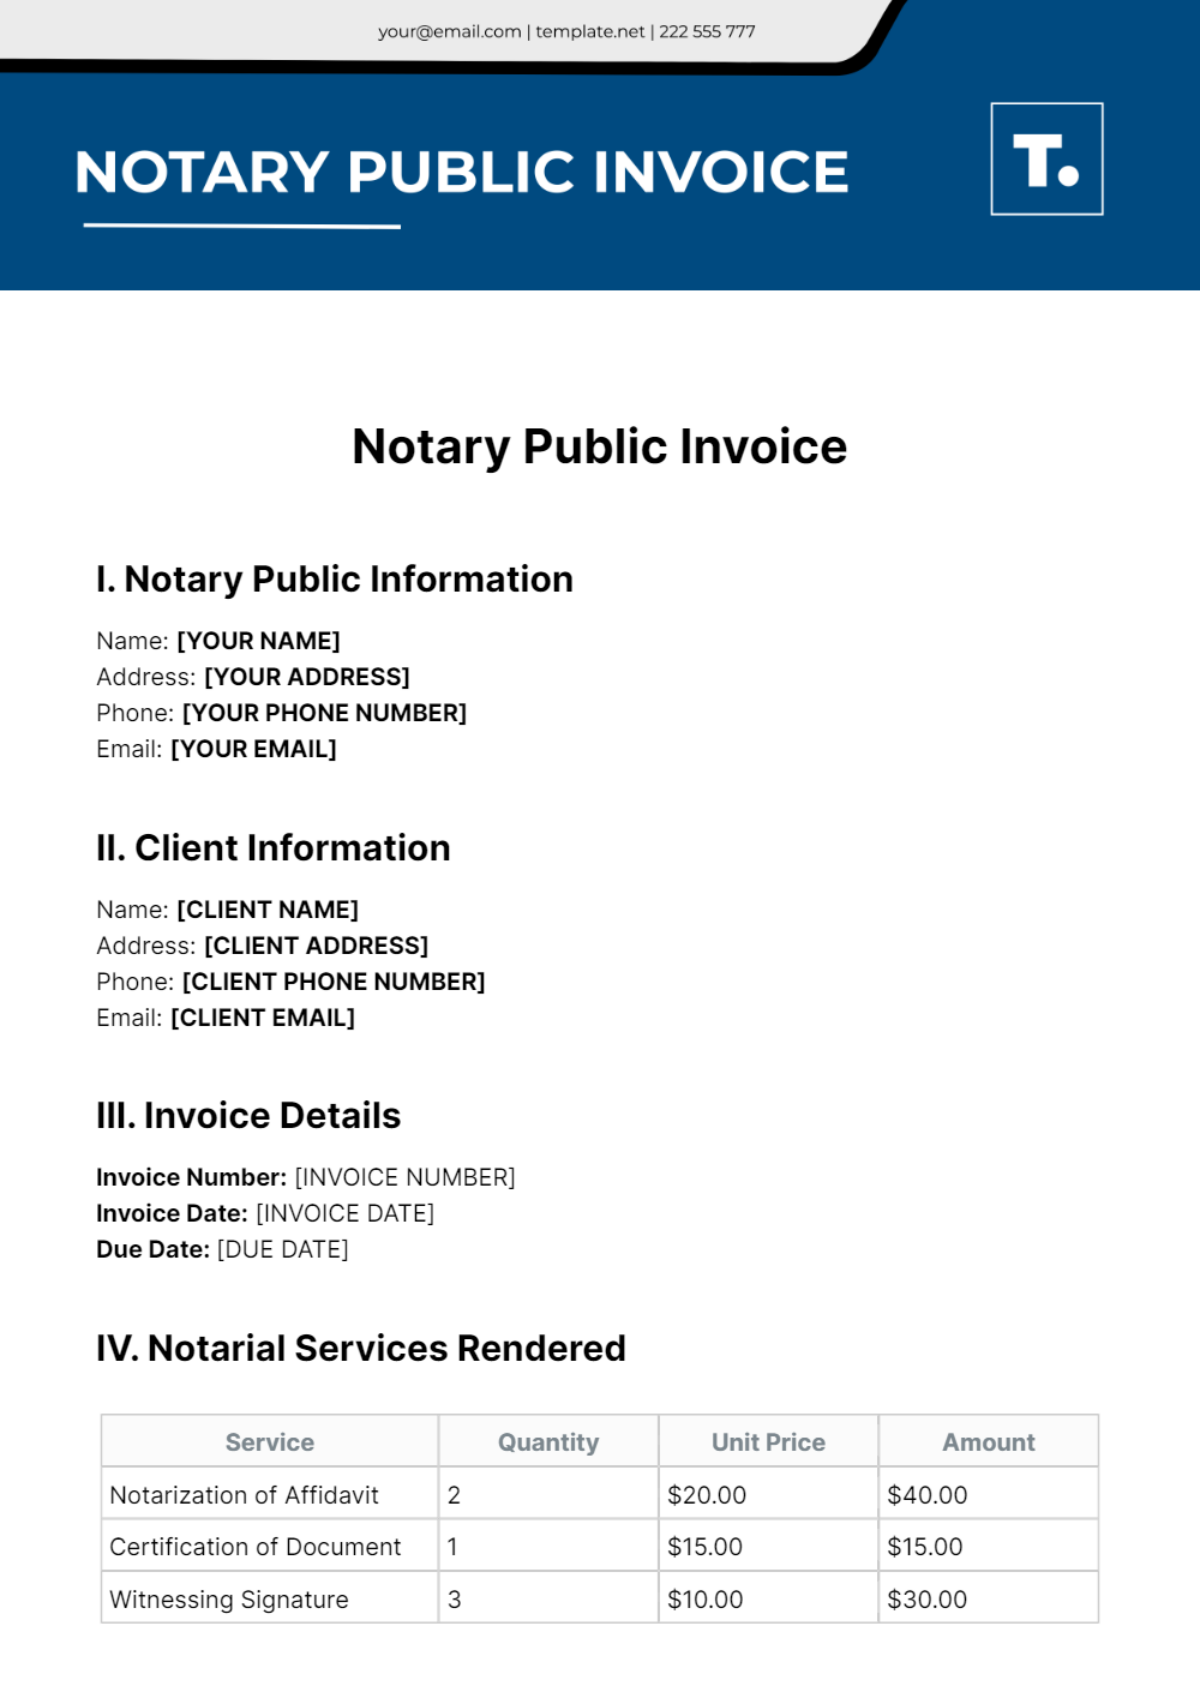 Notary Public Invoice Template